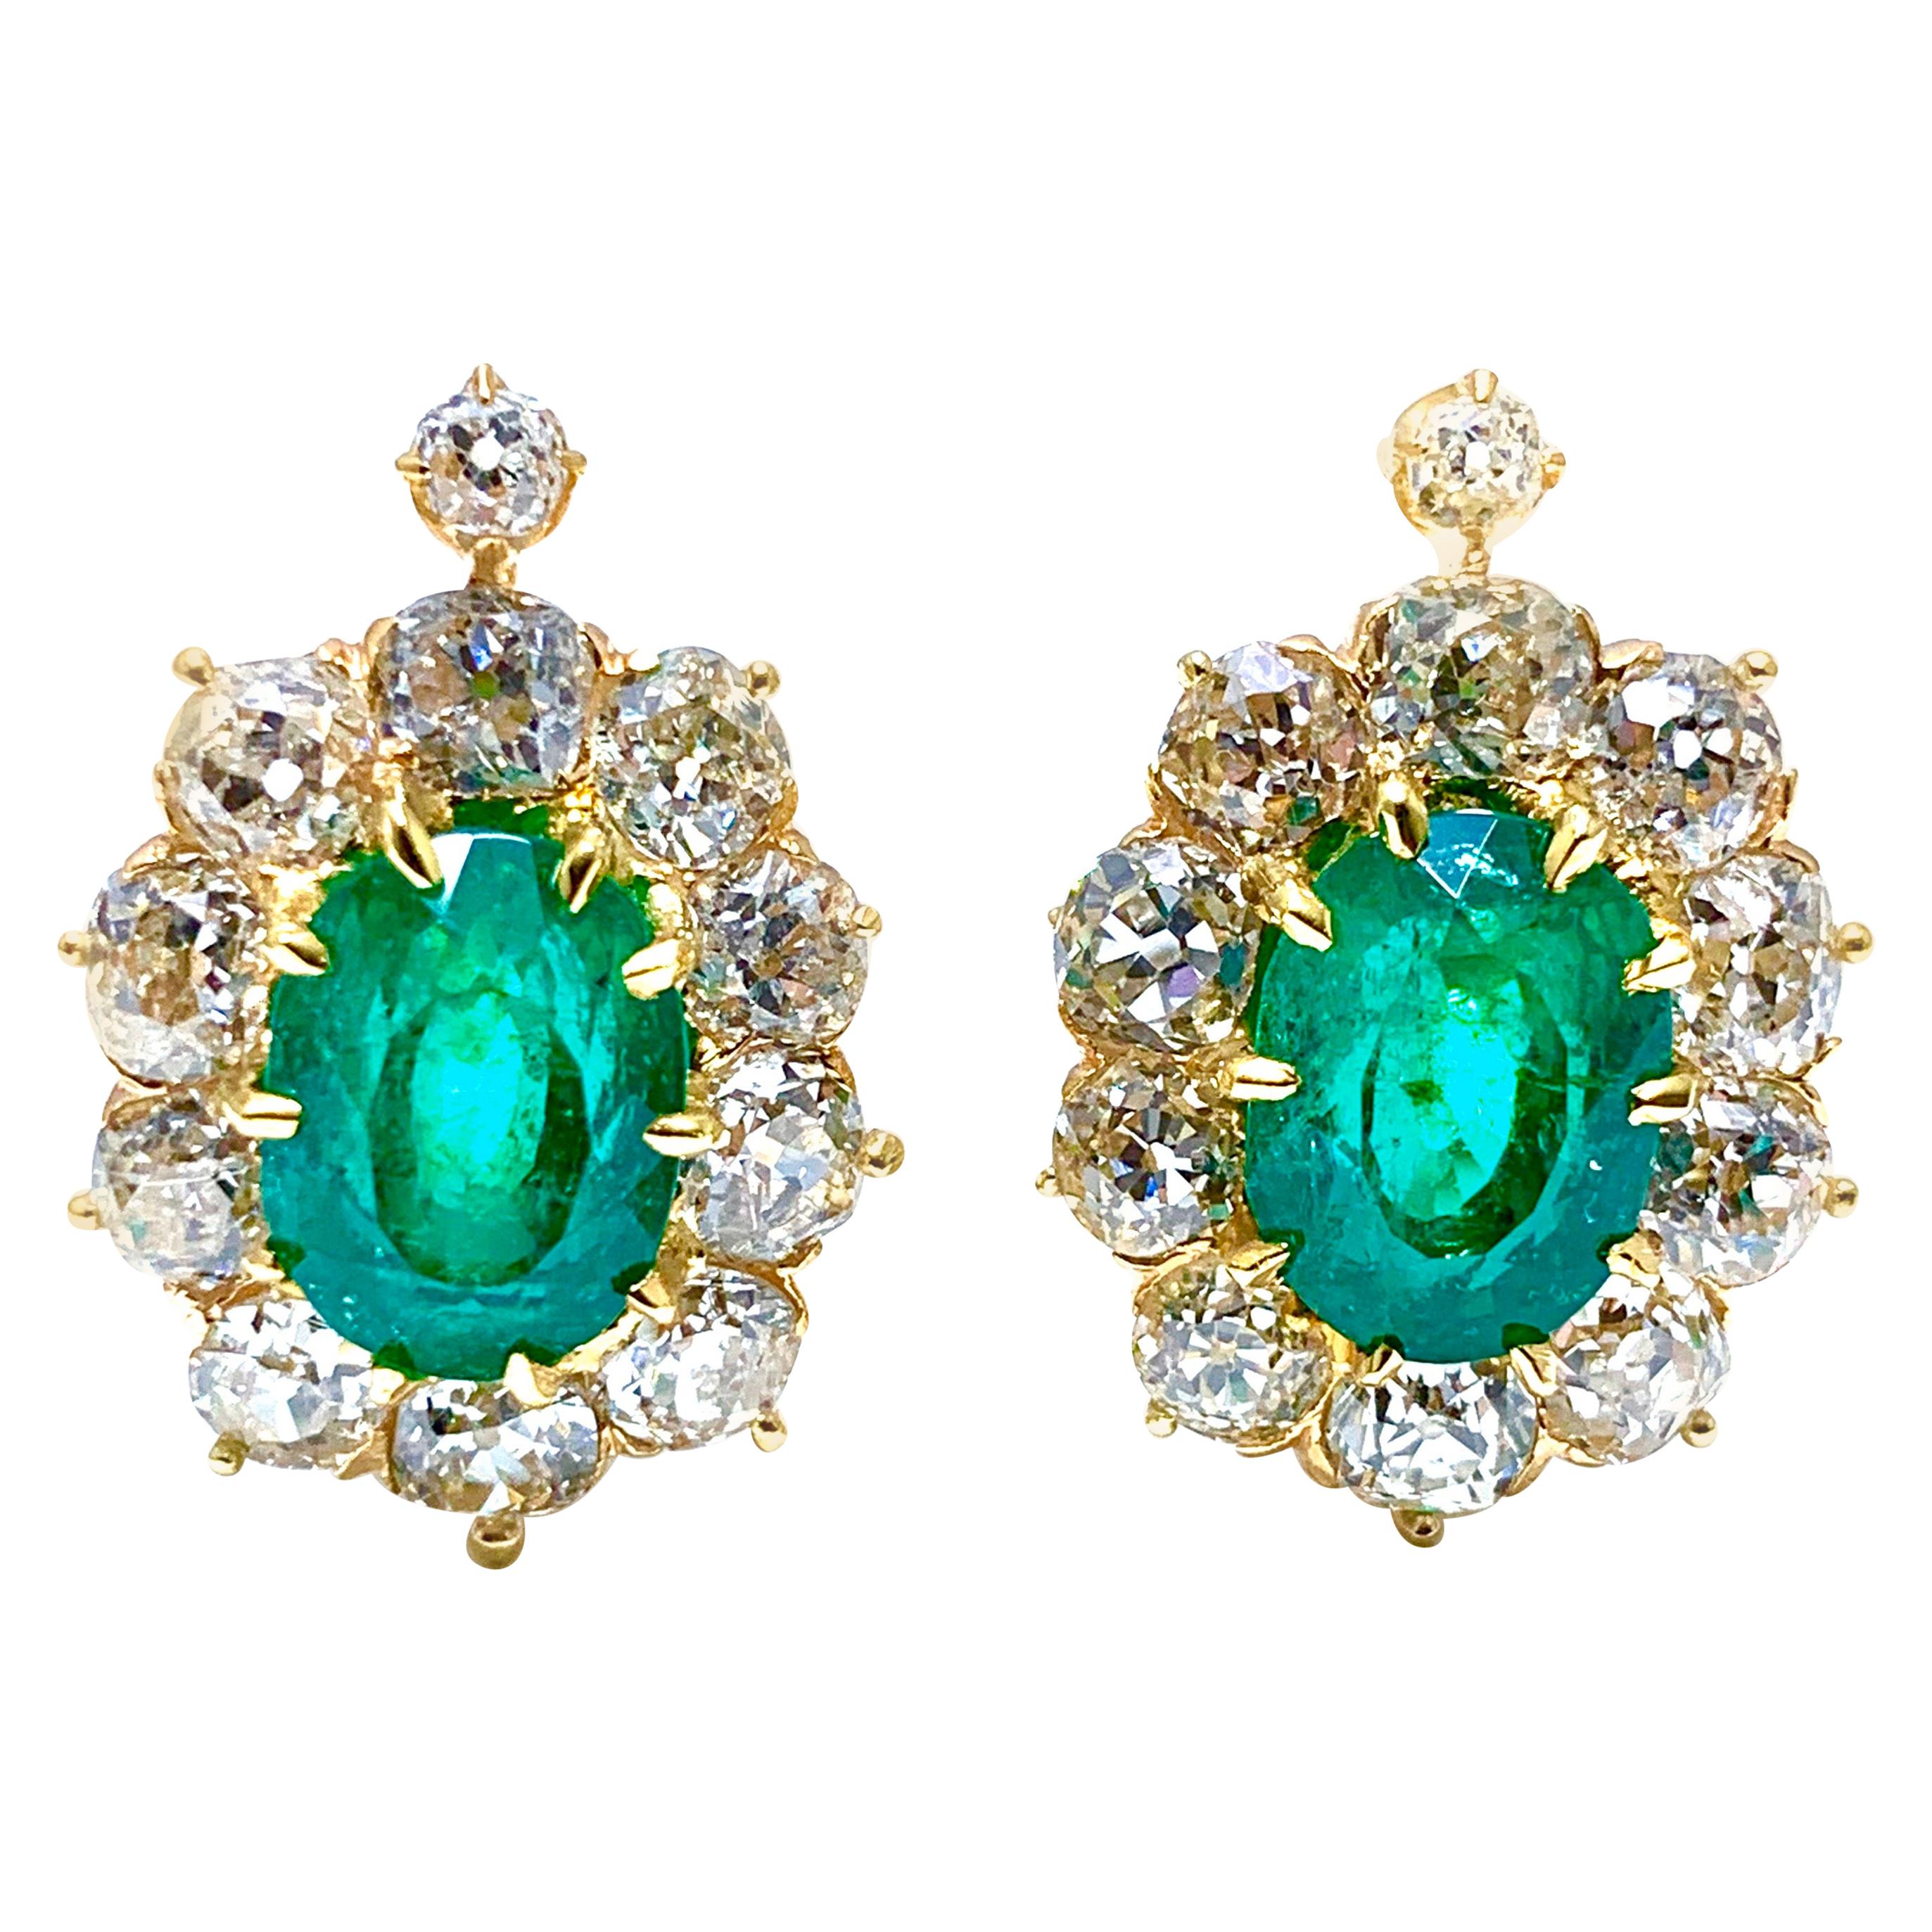 6.25 Carat Natural Colombian Oval Emerald and Old European Cut Diamonds Earrings